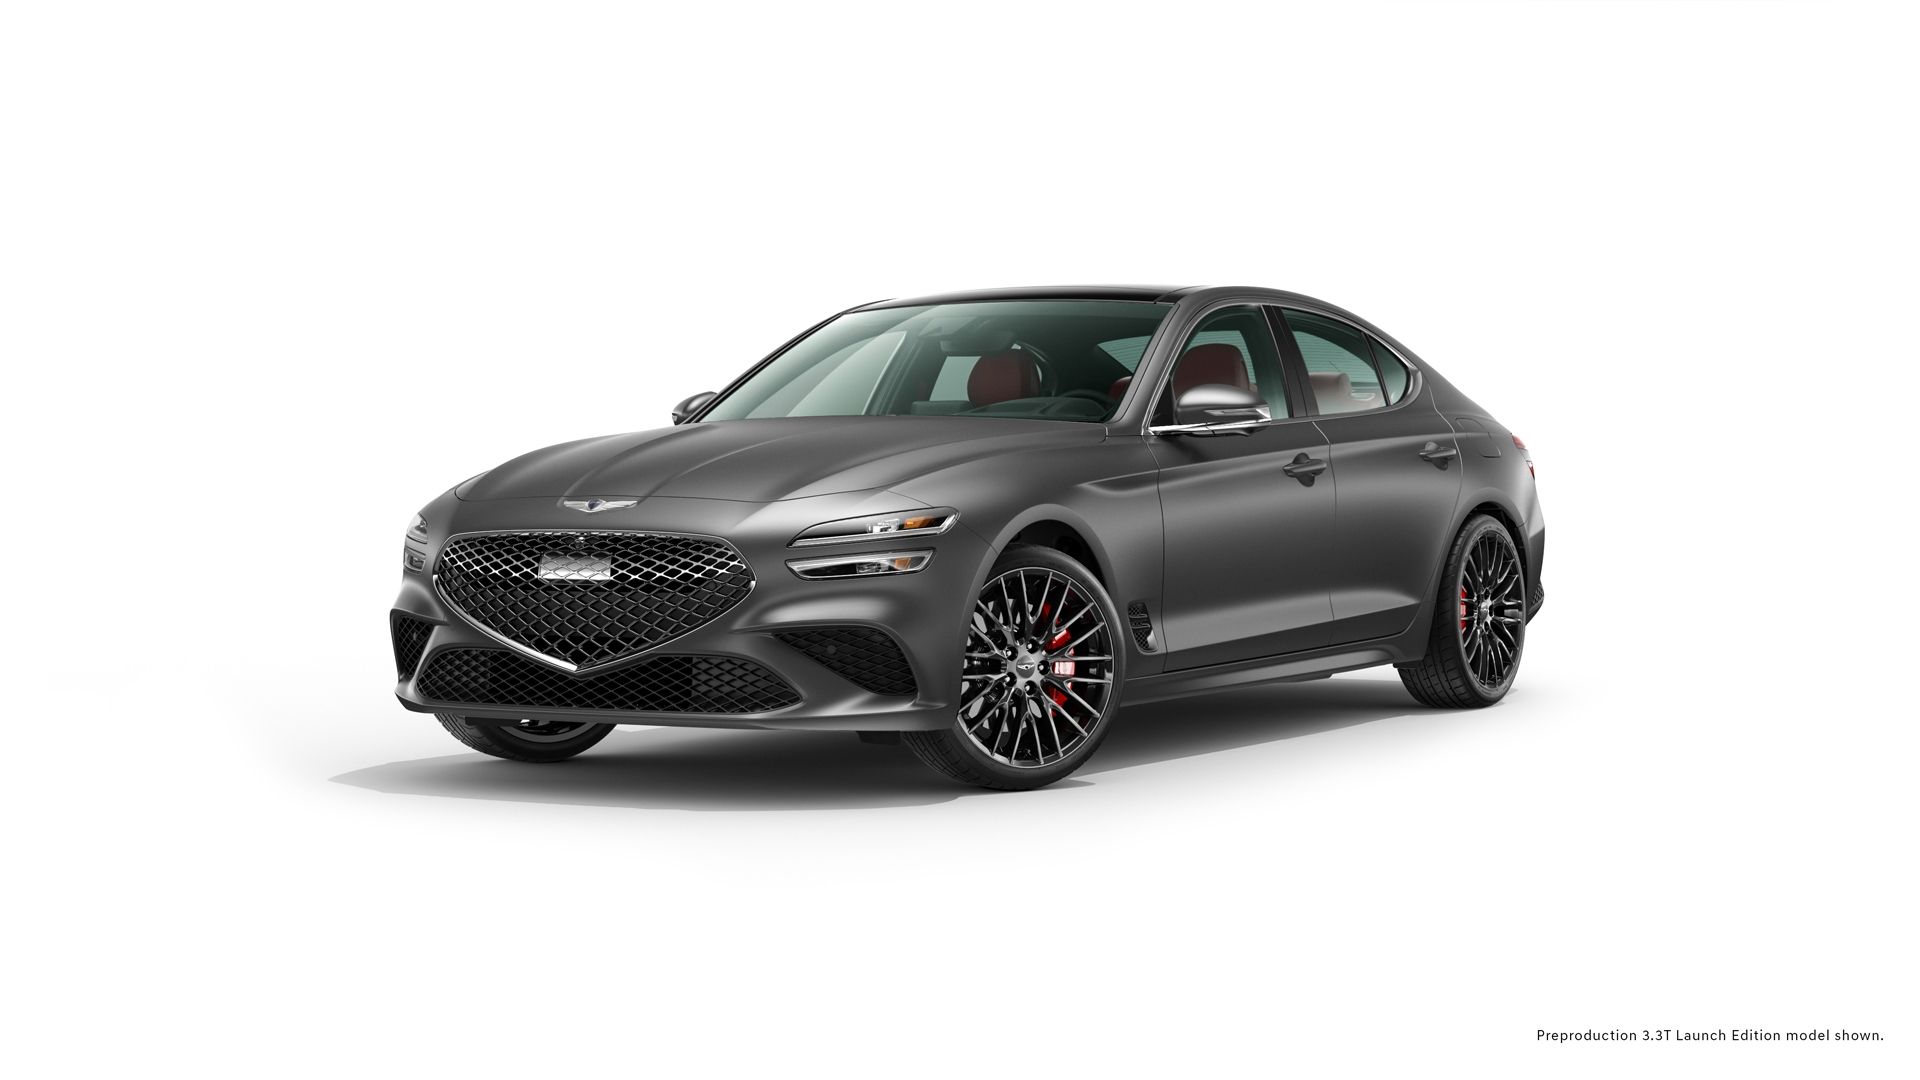 2022 Genesis G70 Shows Off Launch Edition Model for U.S